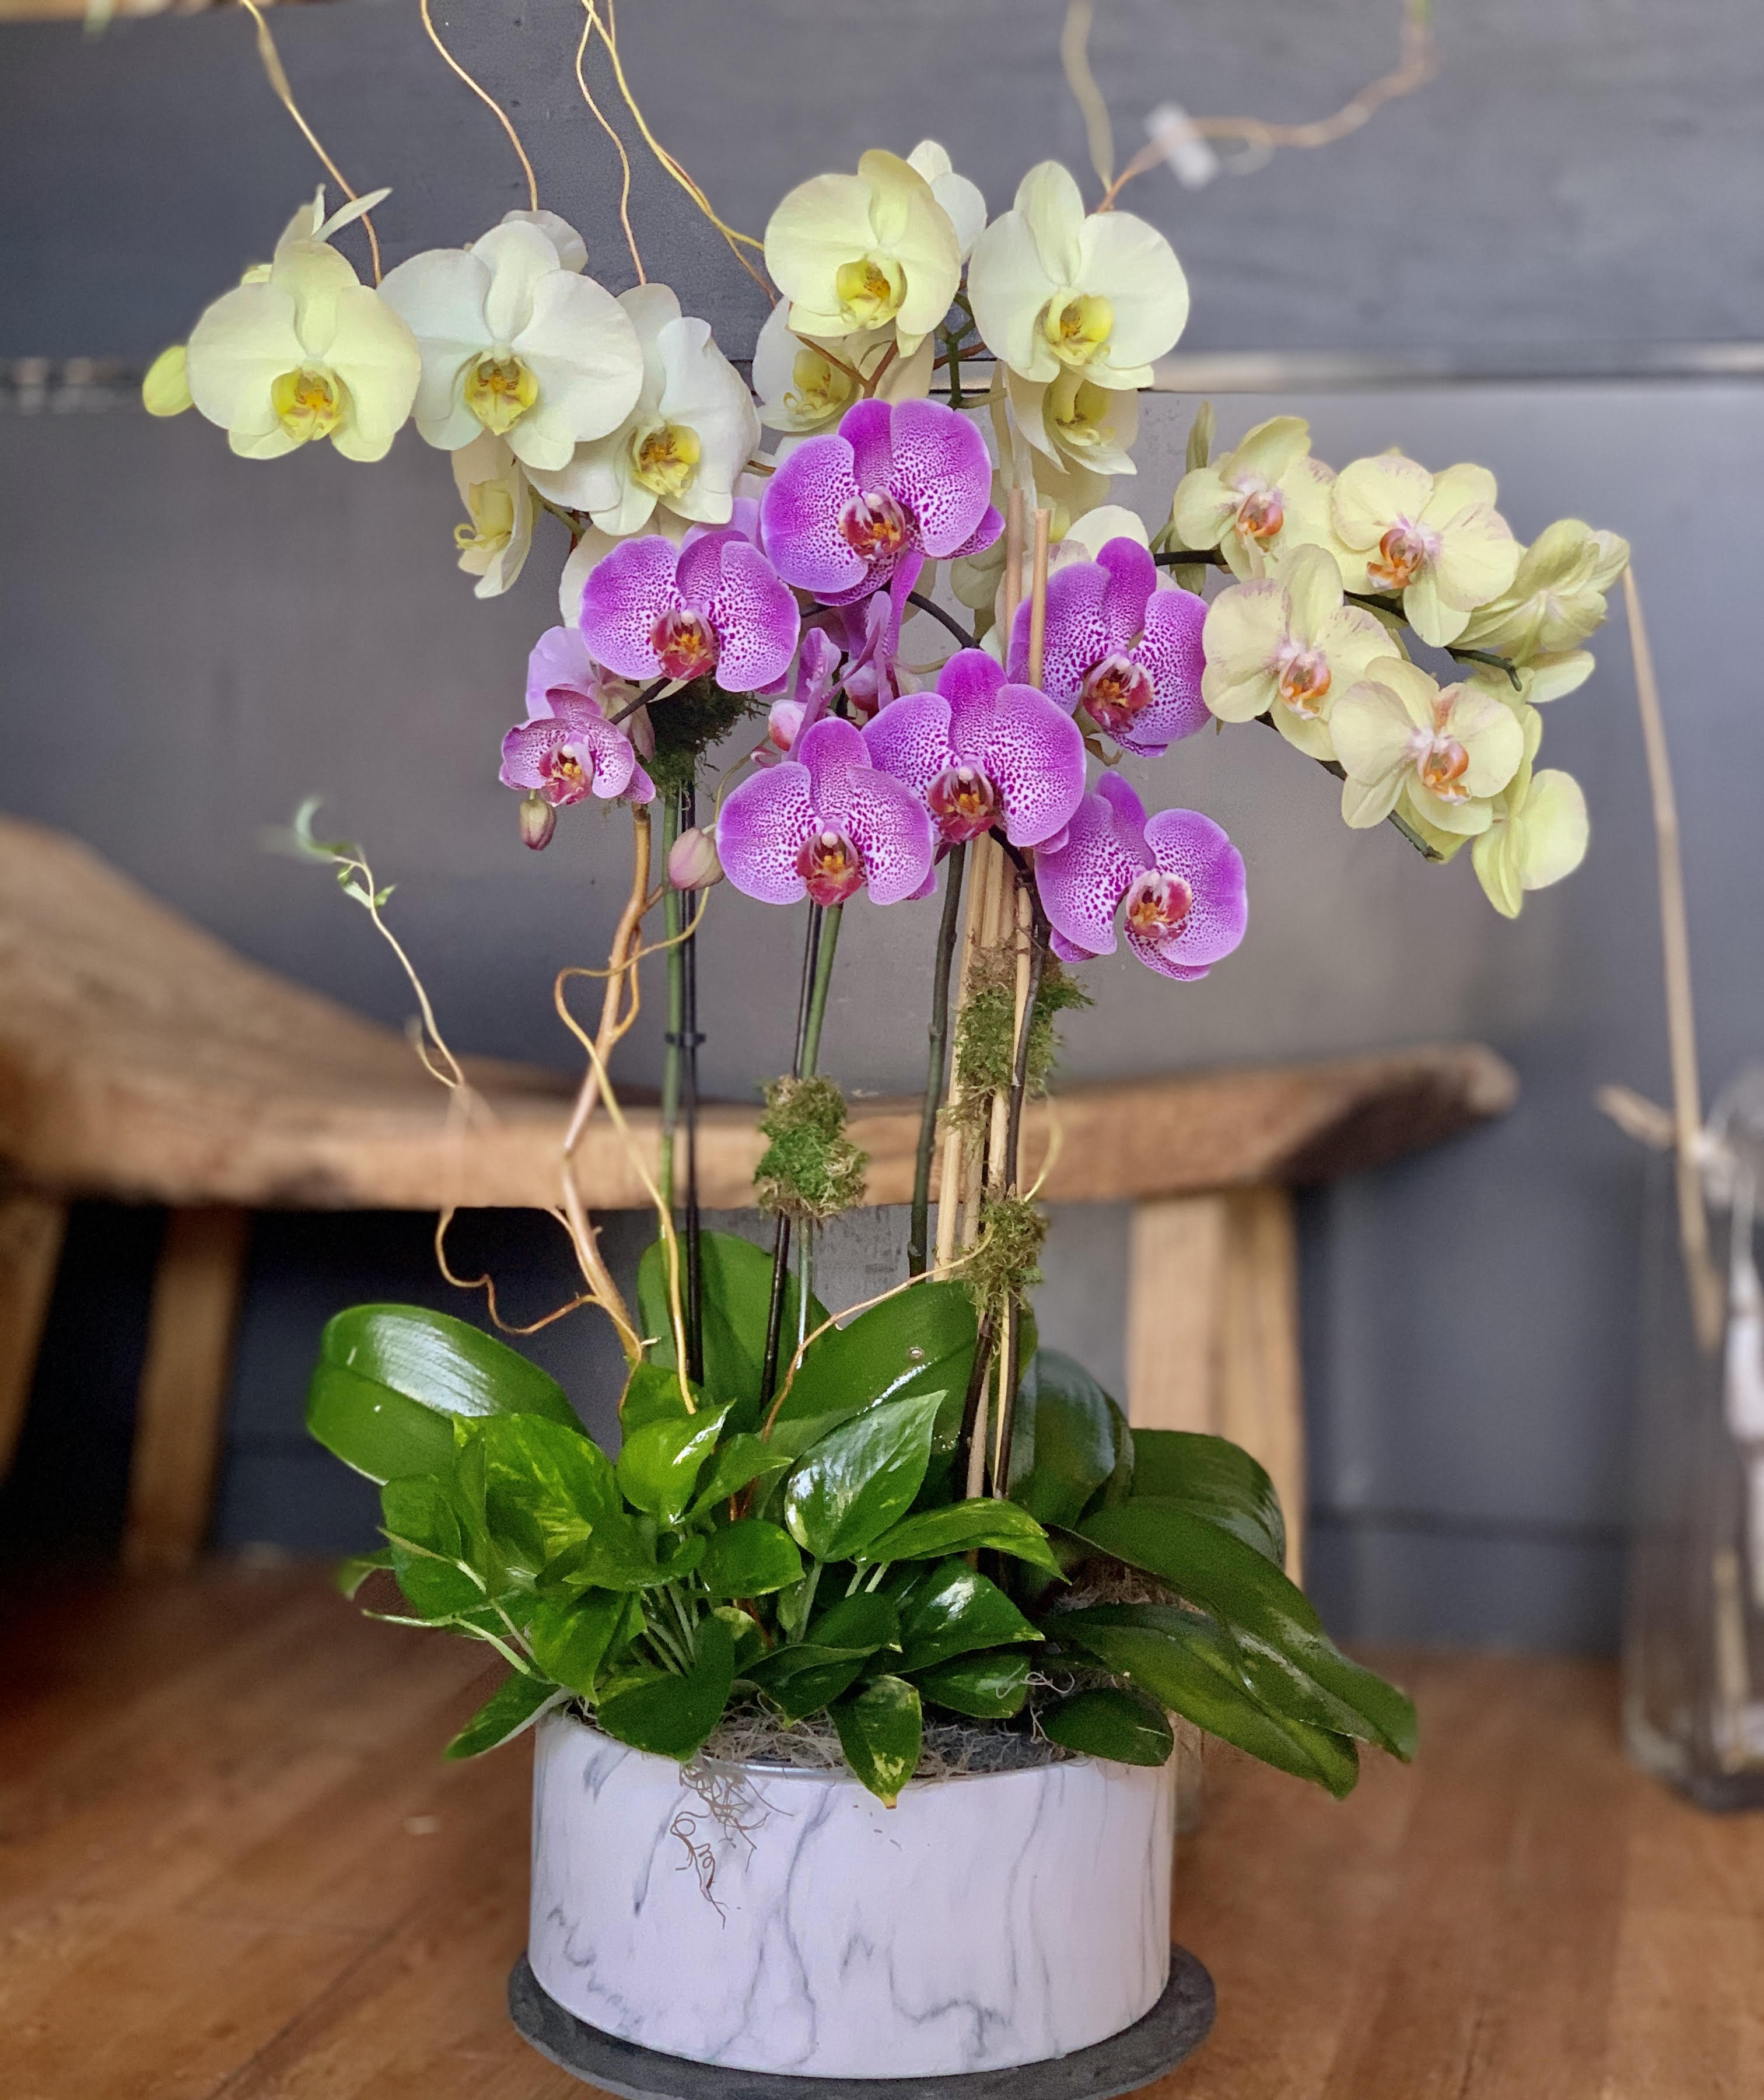 ELEGANT MODERN ORCHIDS ARRANGEMENT -  PREMIUM SELECTED COLOR ORCHIDS - DESIGN IN AN MODERN MABLE STYLE CONTAINER.